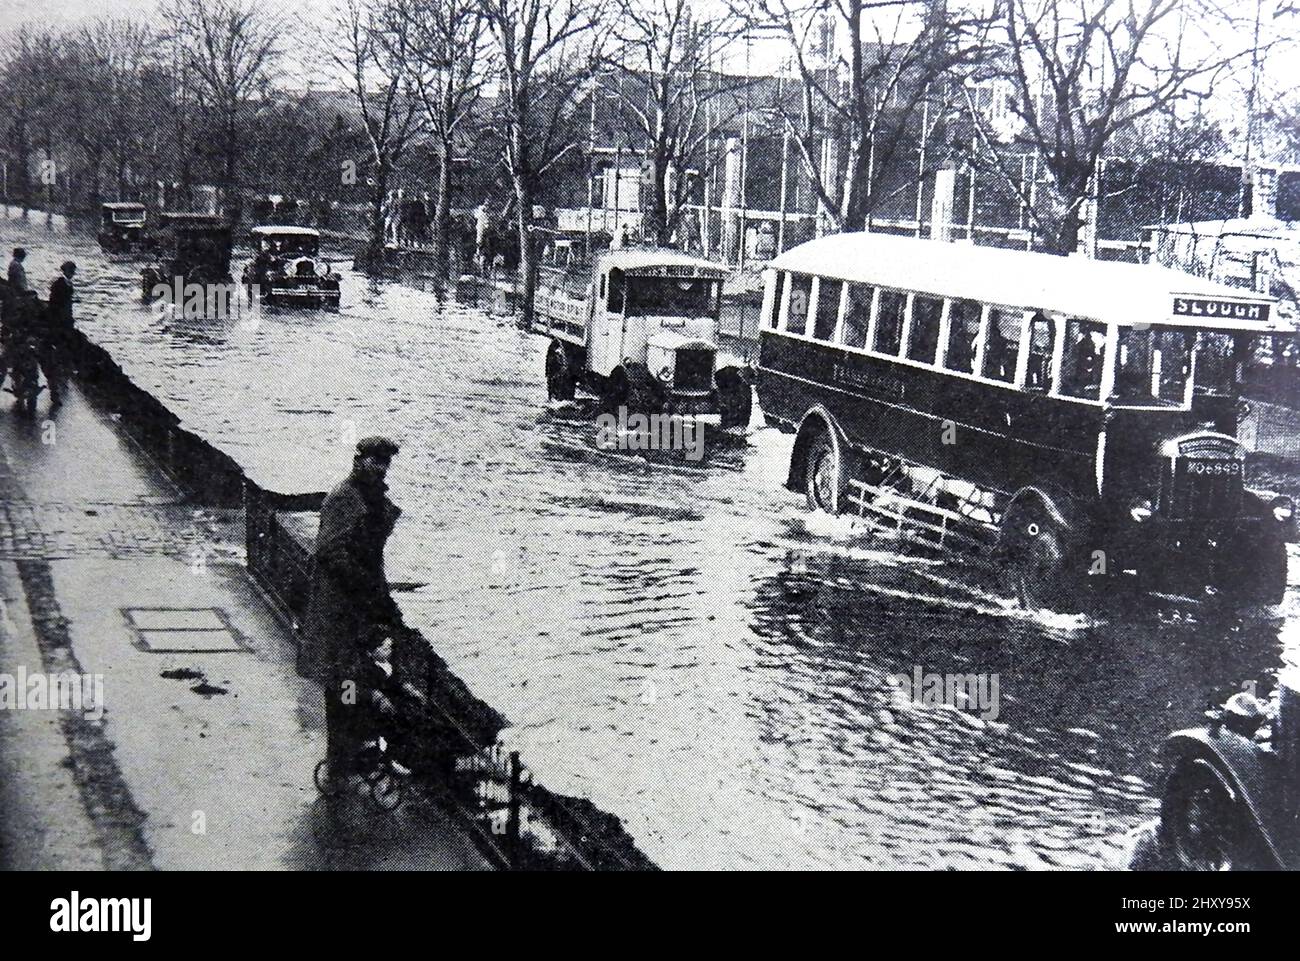 A Circa 1930's press photo of floods on the Great Bath Road at Maidenhead, UK.  The old bus  is heading for Slough Stock Photo